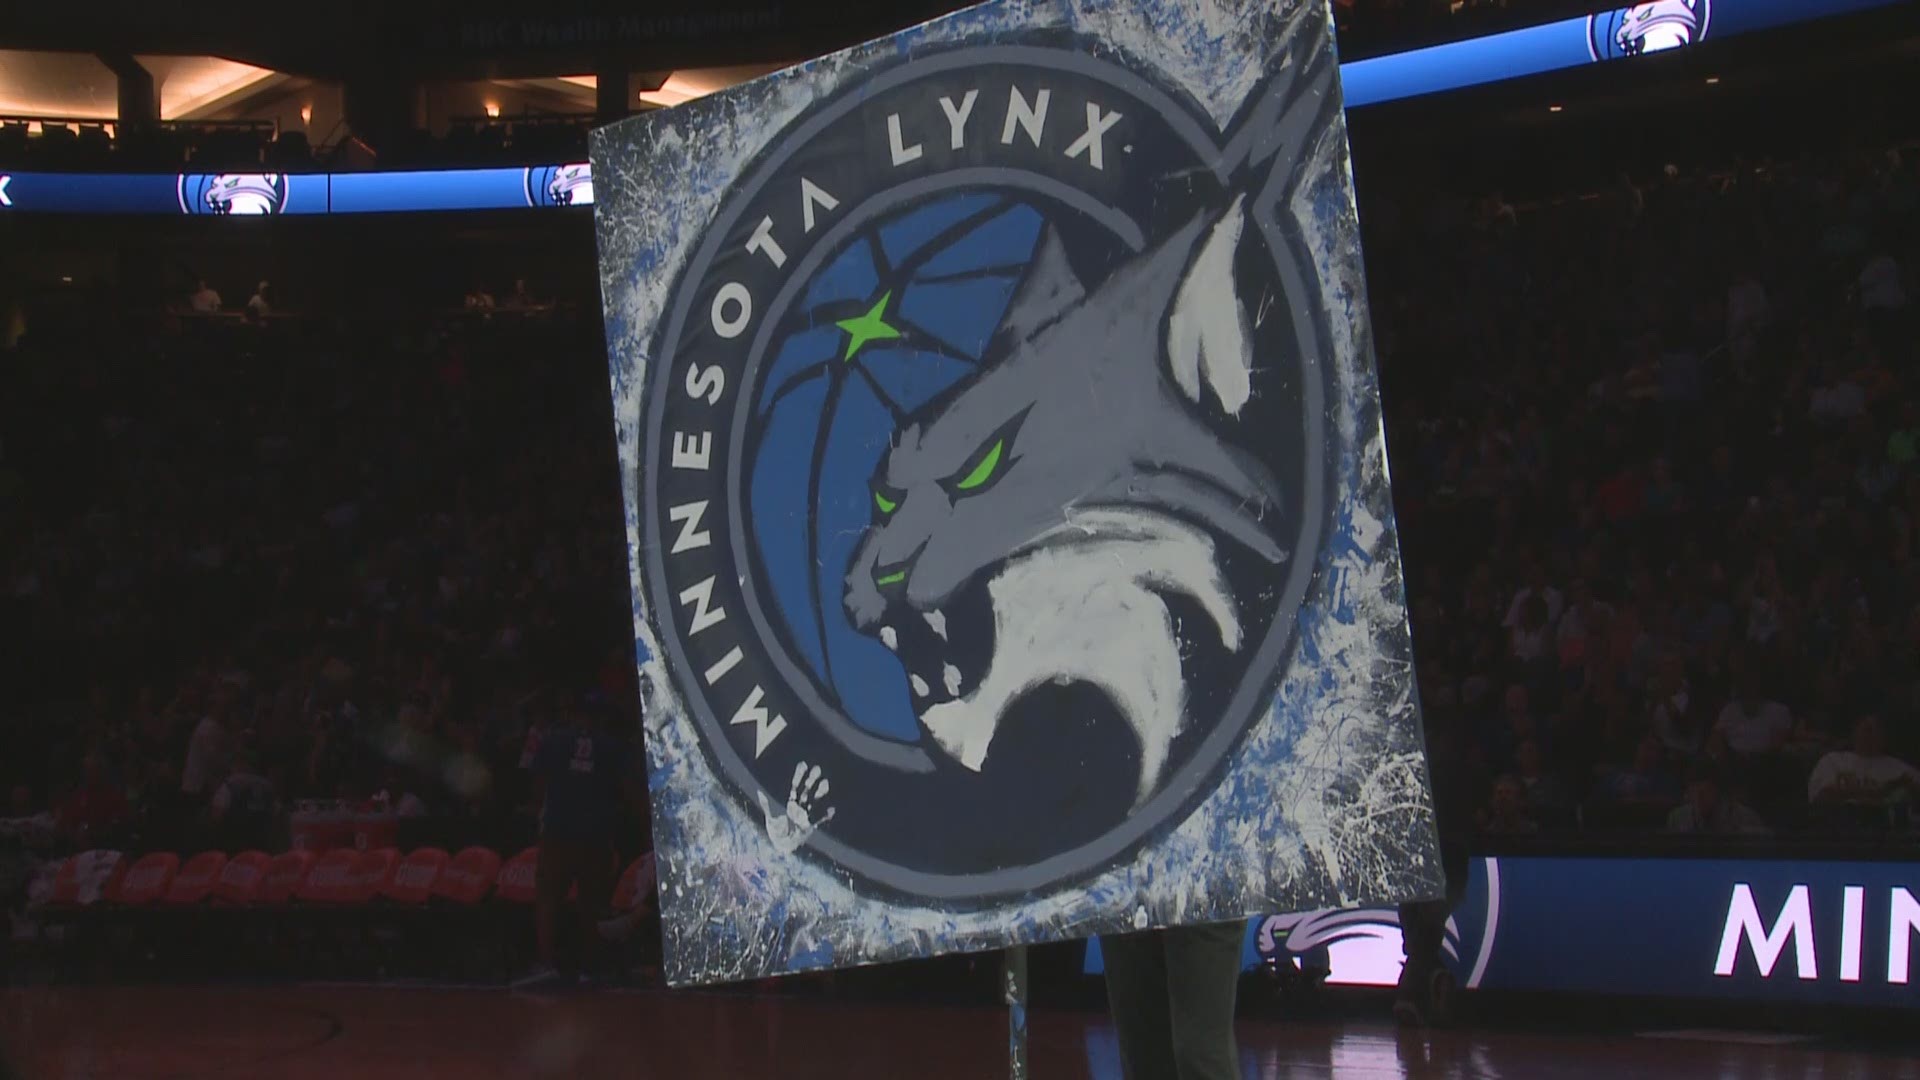 Lynx unveil new logo on Friday night at Xcel Energy Center in St. Paul.